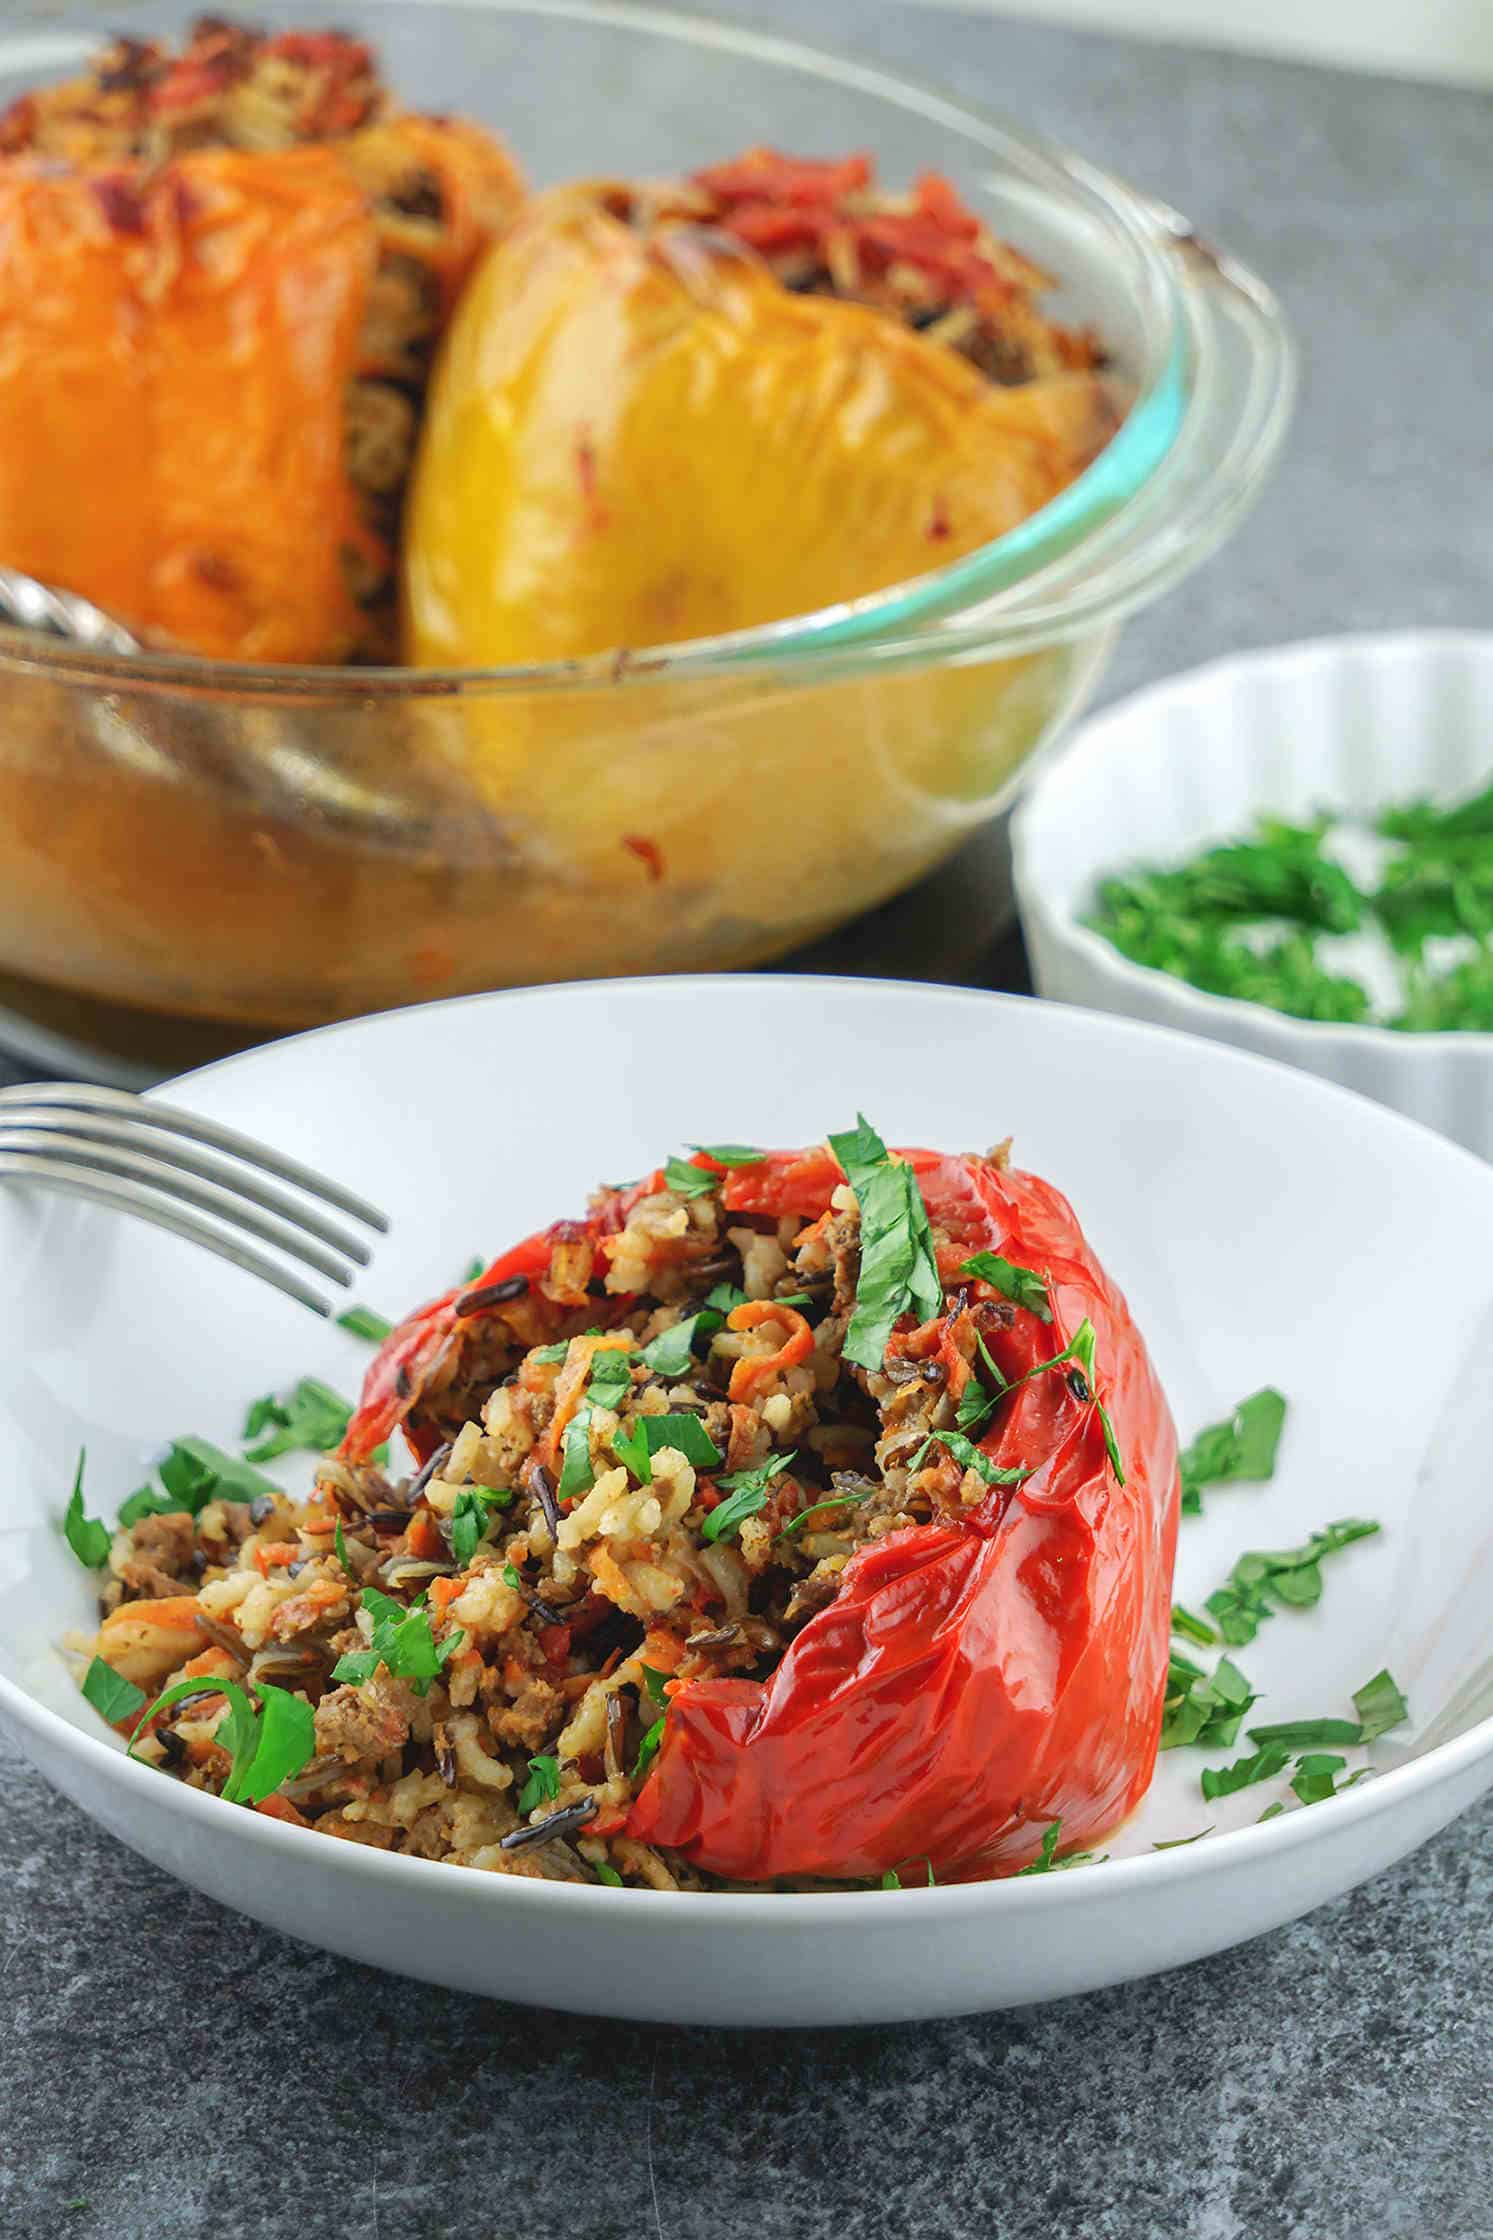 Healthy stuffed peppers – a comforting gluten free, dairy free, clean eating recipe great for dinner or lunch. The bell peppers are stuffed with a mix of wild rice and long grain rice, organic grass fed ground beef, caramelized veggies, aromatic herbs, spices and baked in the oven until moist and tender.